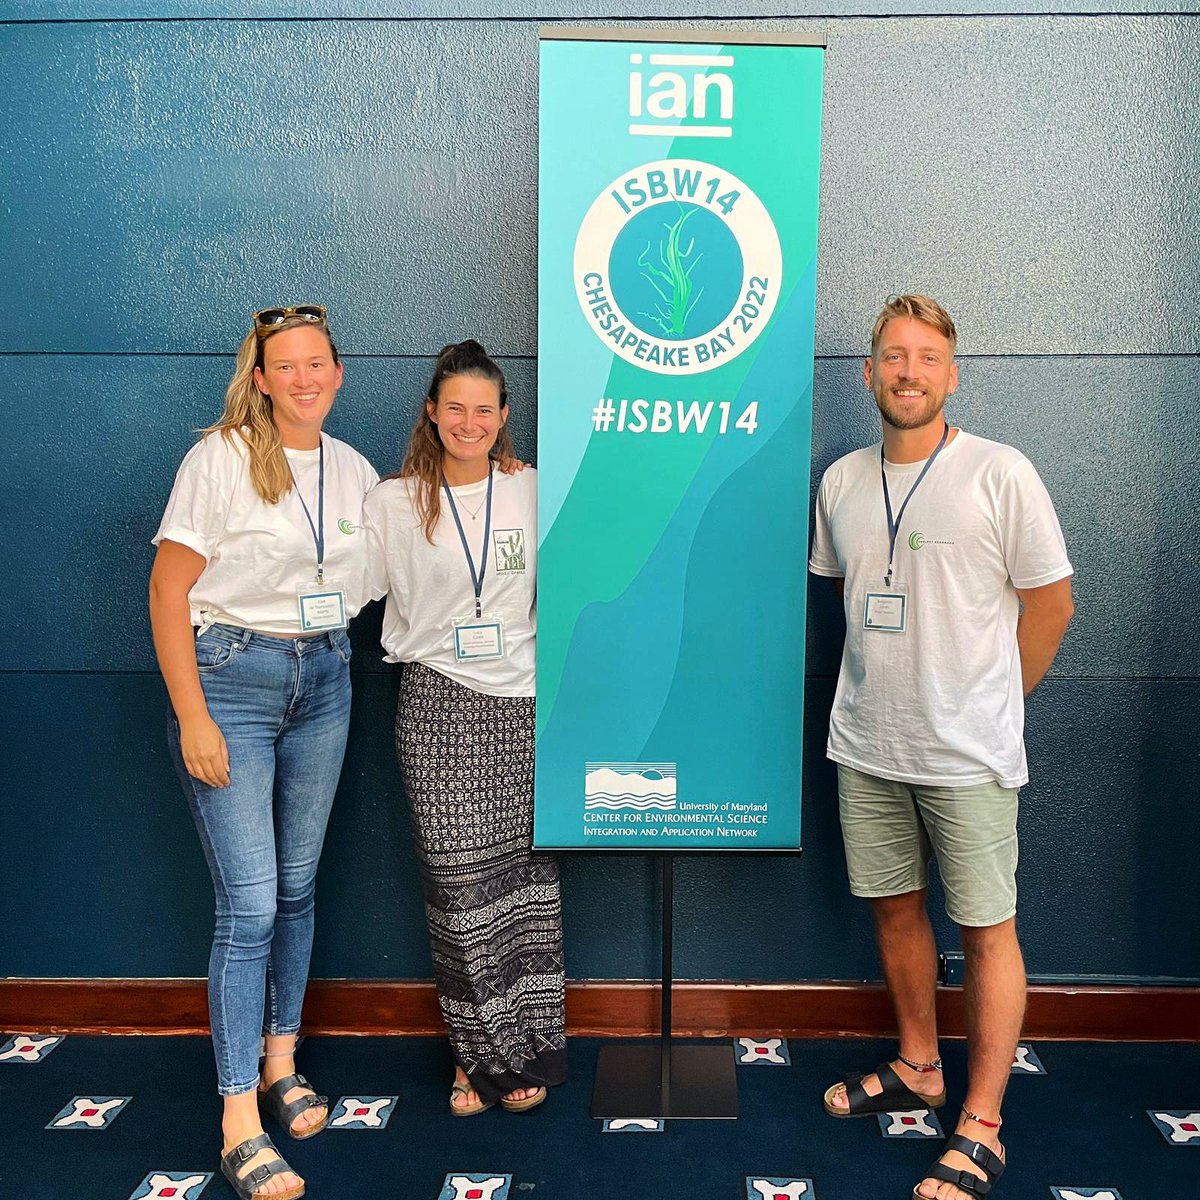 It’s been an exciting week for some of the team attending #ISBW14 🇺🇸🌱 There has been so much knowledge exchanged and new connections made to help better seagrass conservation across the world and we’ve loved learning so much from new exciting seagrass research 🌍 #TeamSeagrass